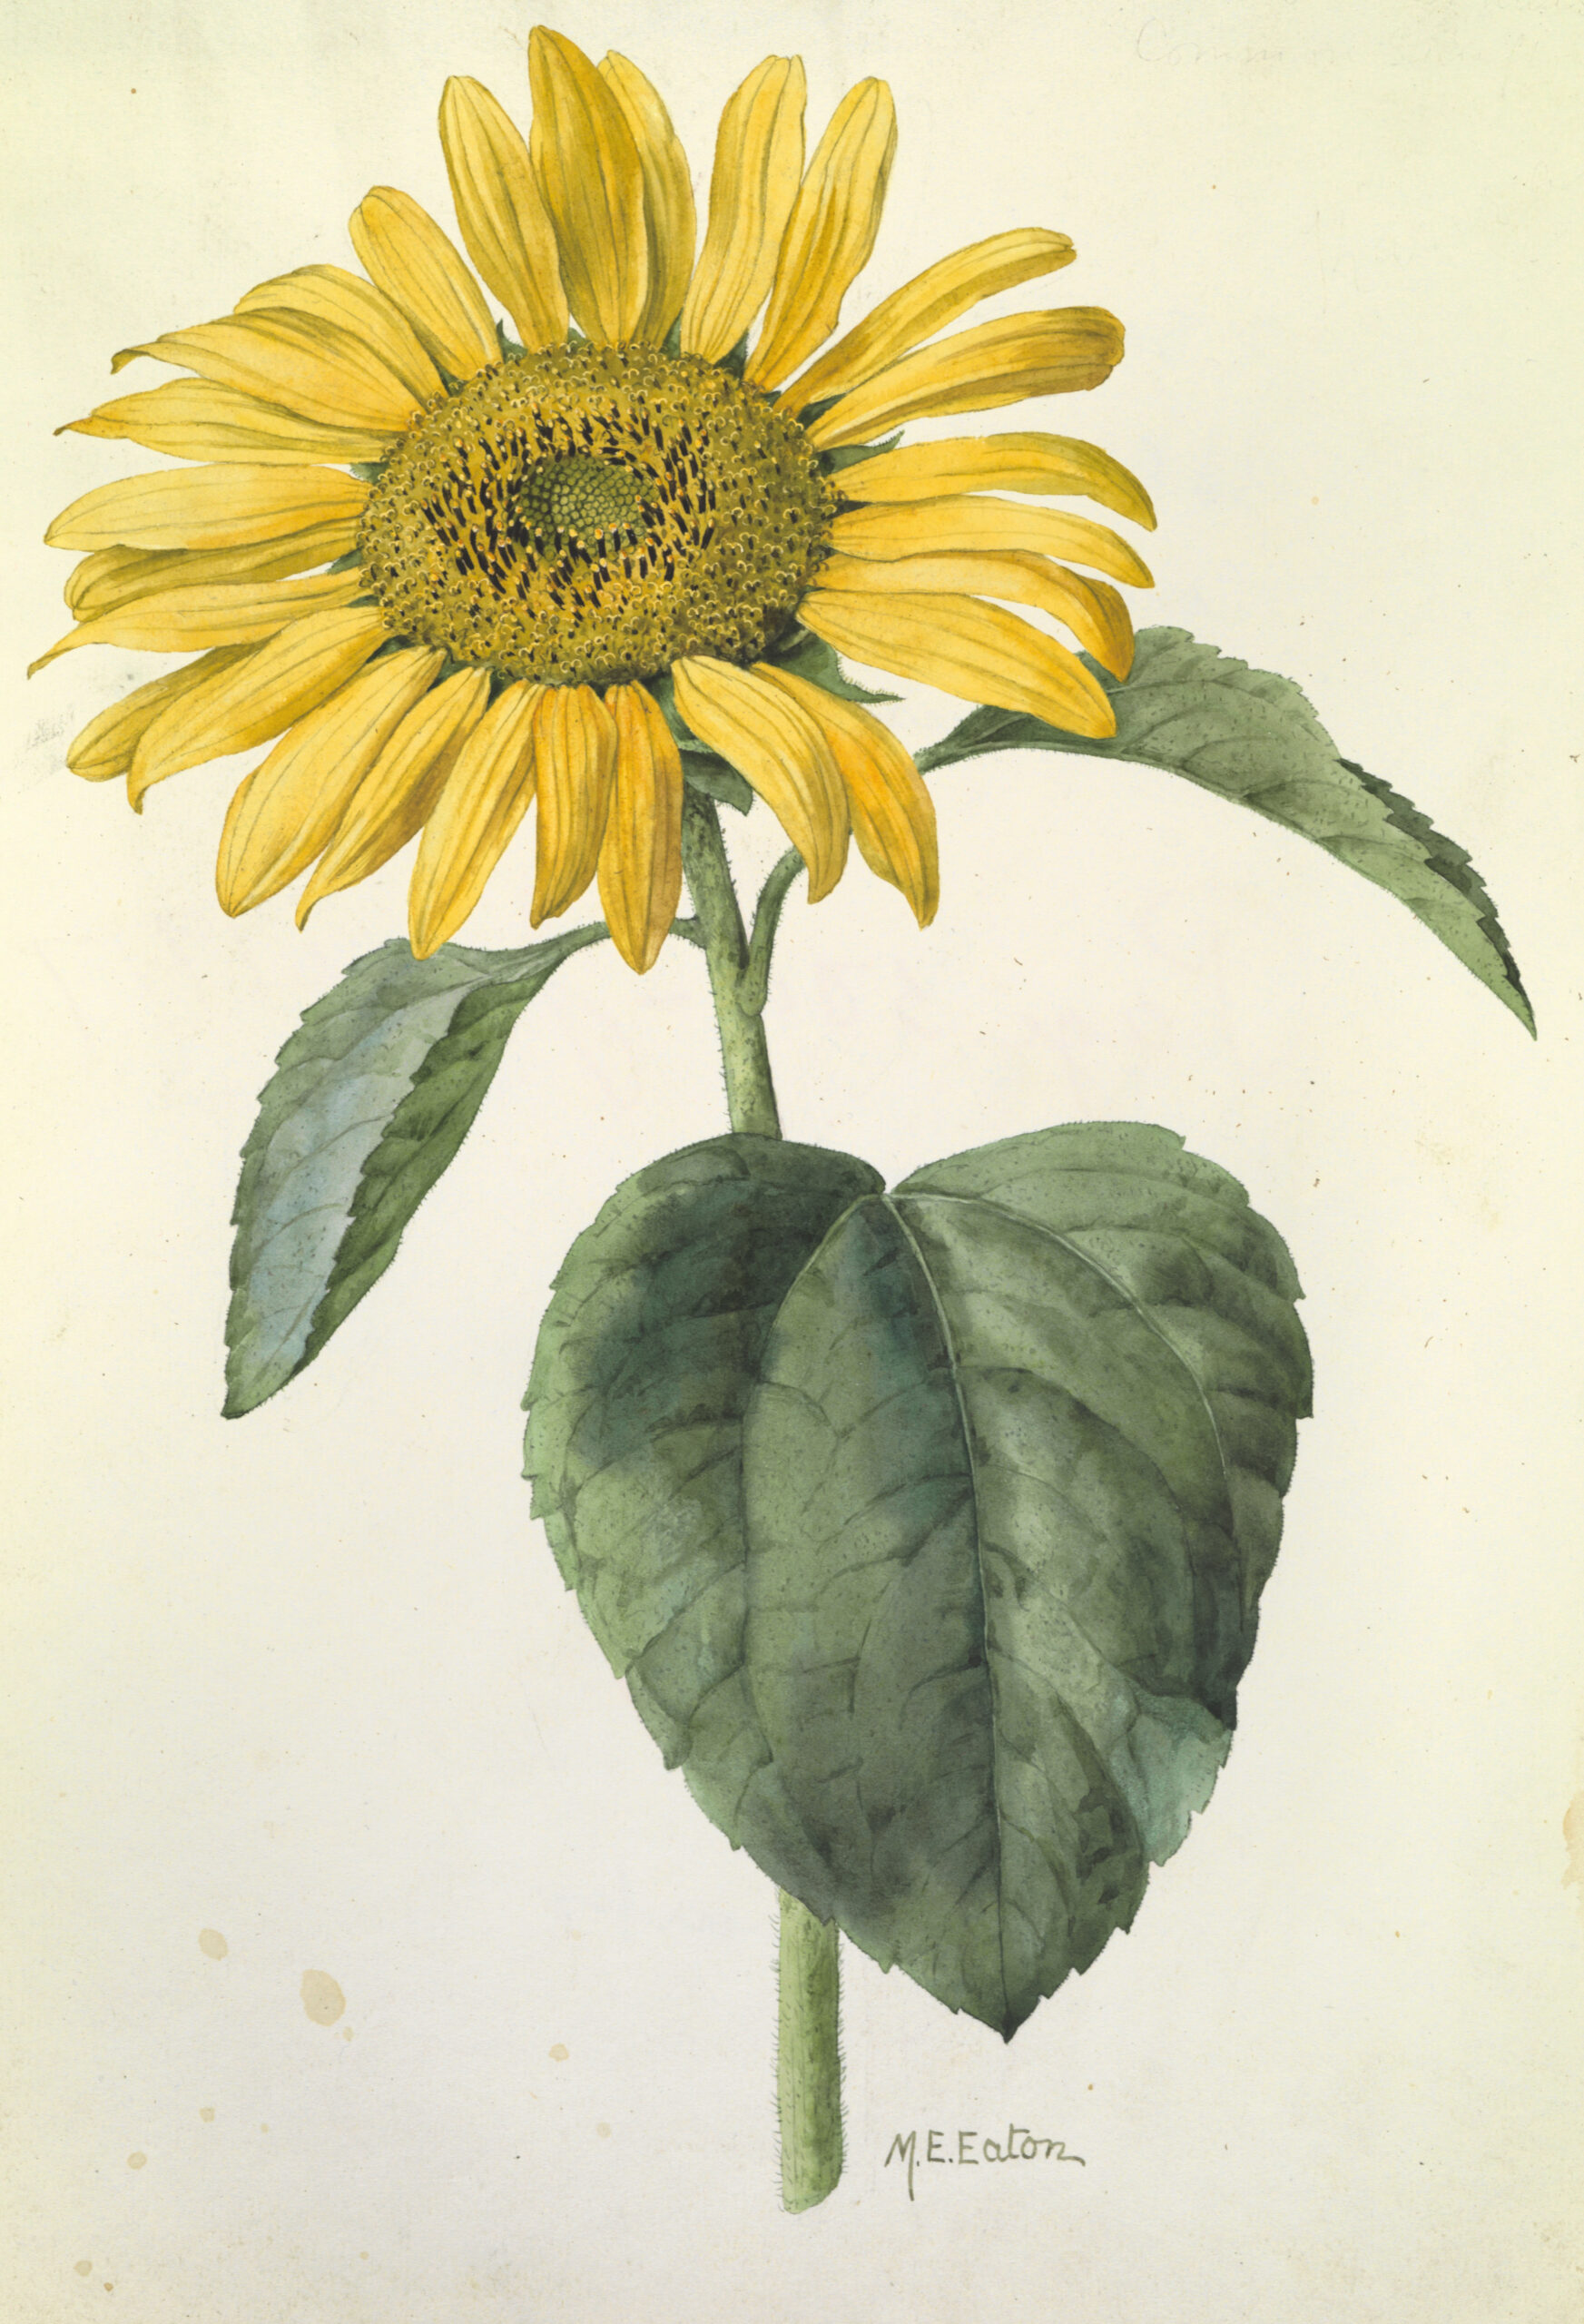 drawing of a sunflower